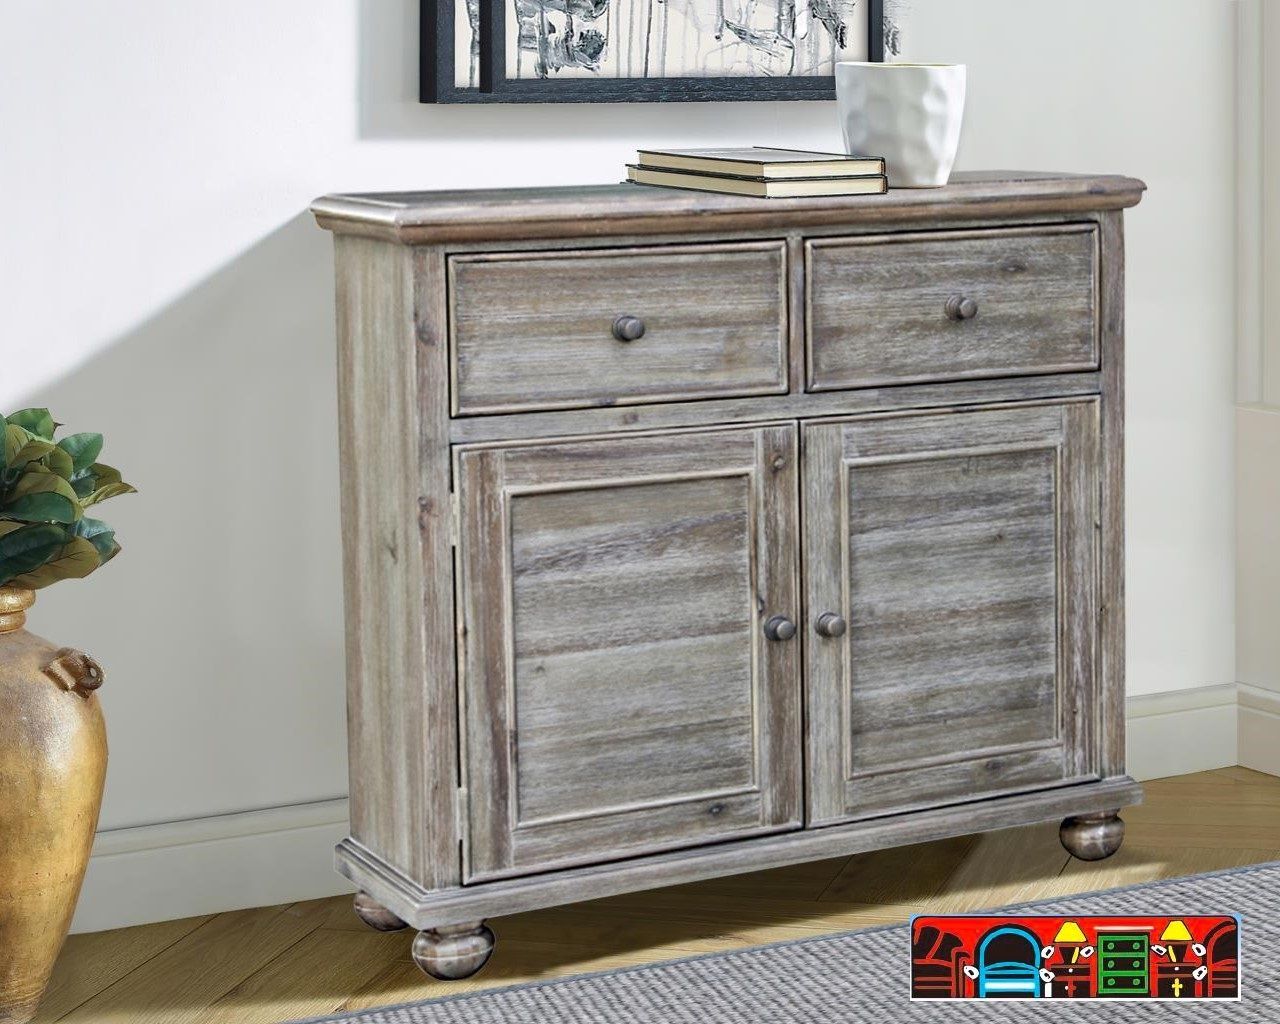 The Studio Ash Cabinet, crafted from wood and finished in a distressed grey. Features Two drawers, two doors, and a shelf. It is available at Bratz-CFW in Fort Myers, FL.